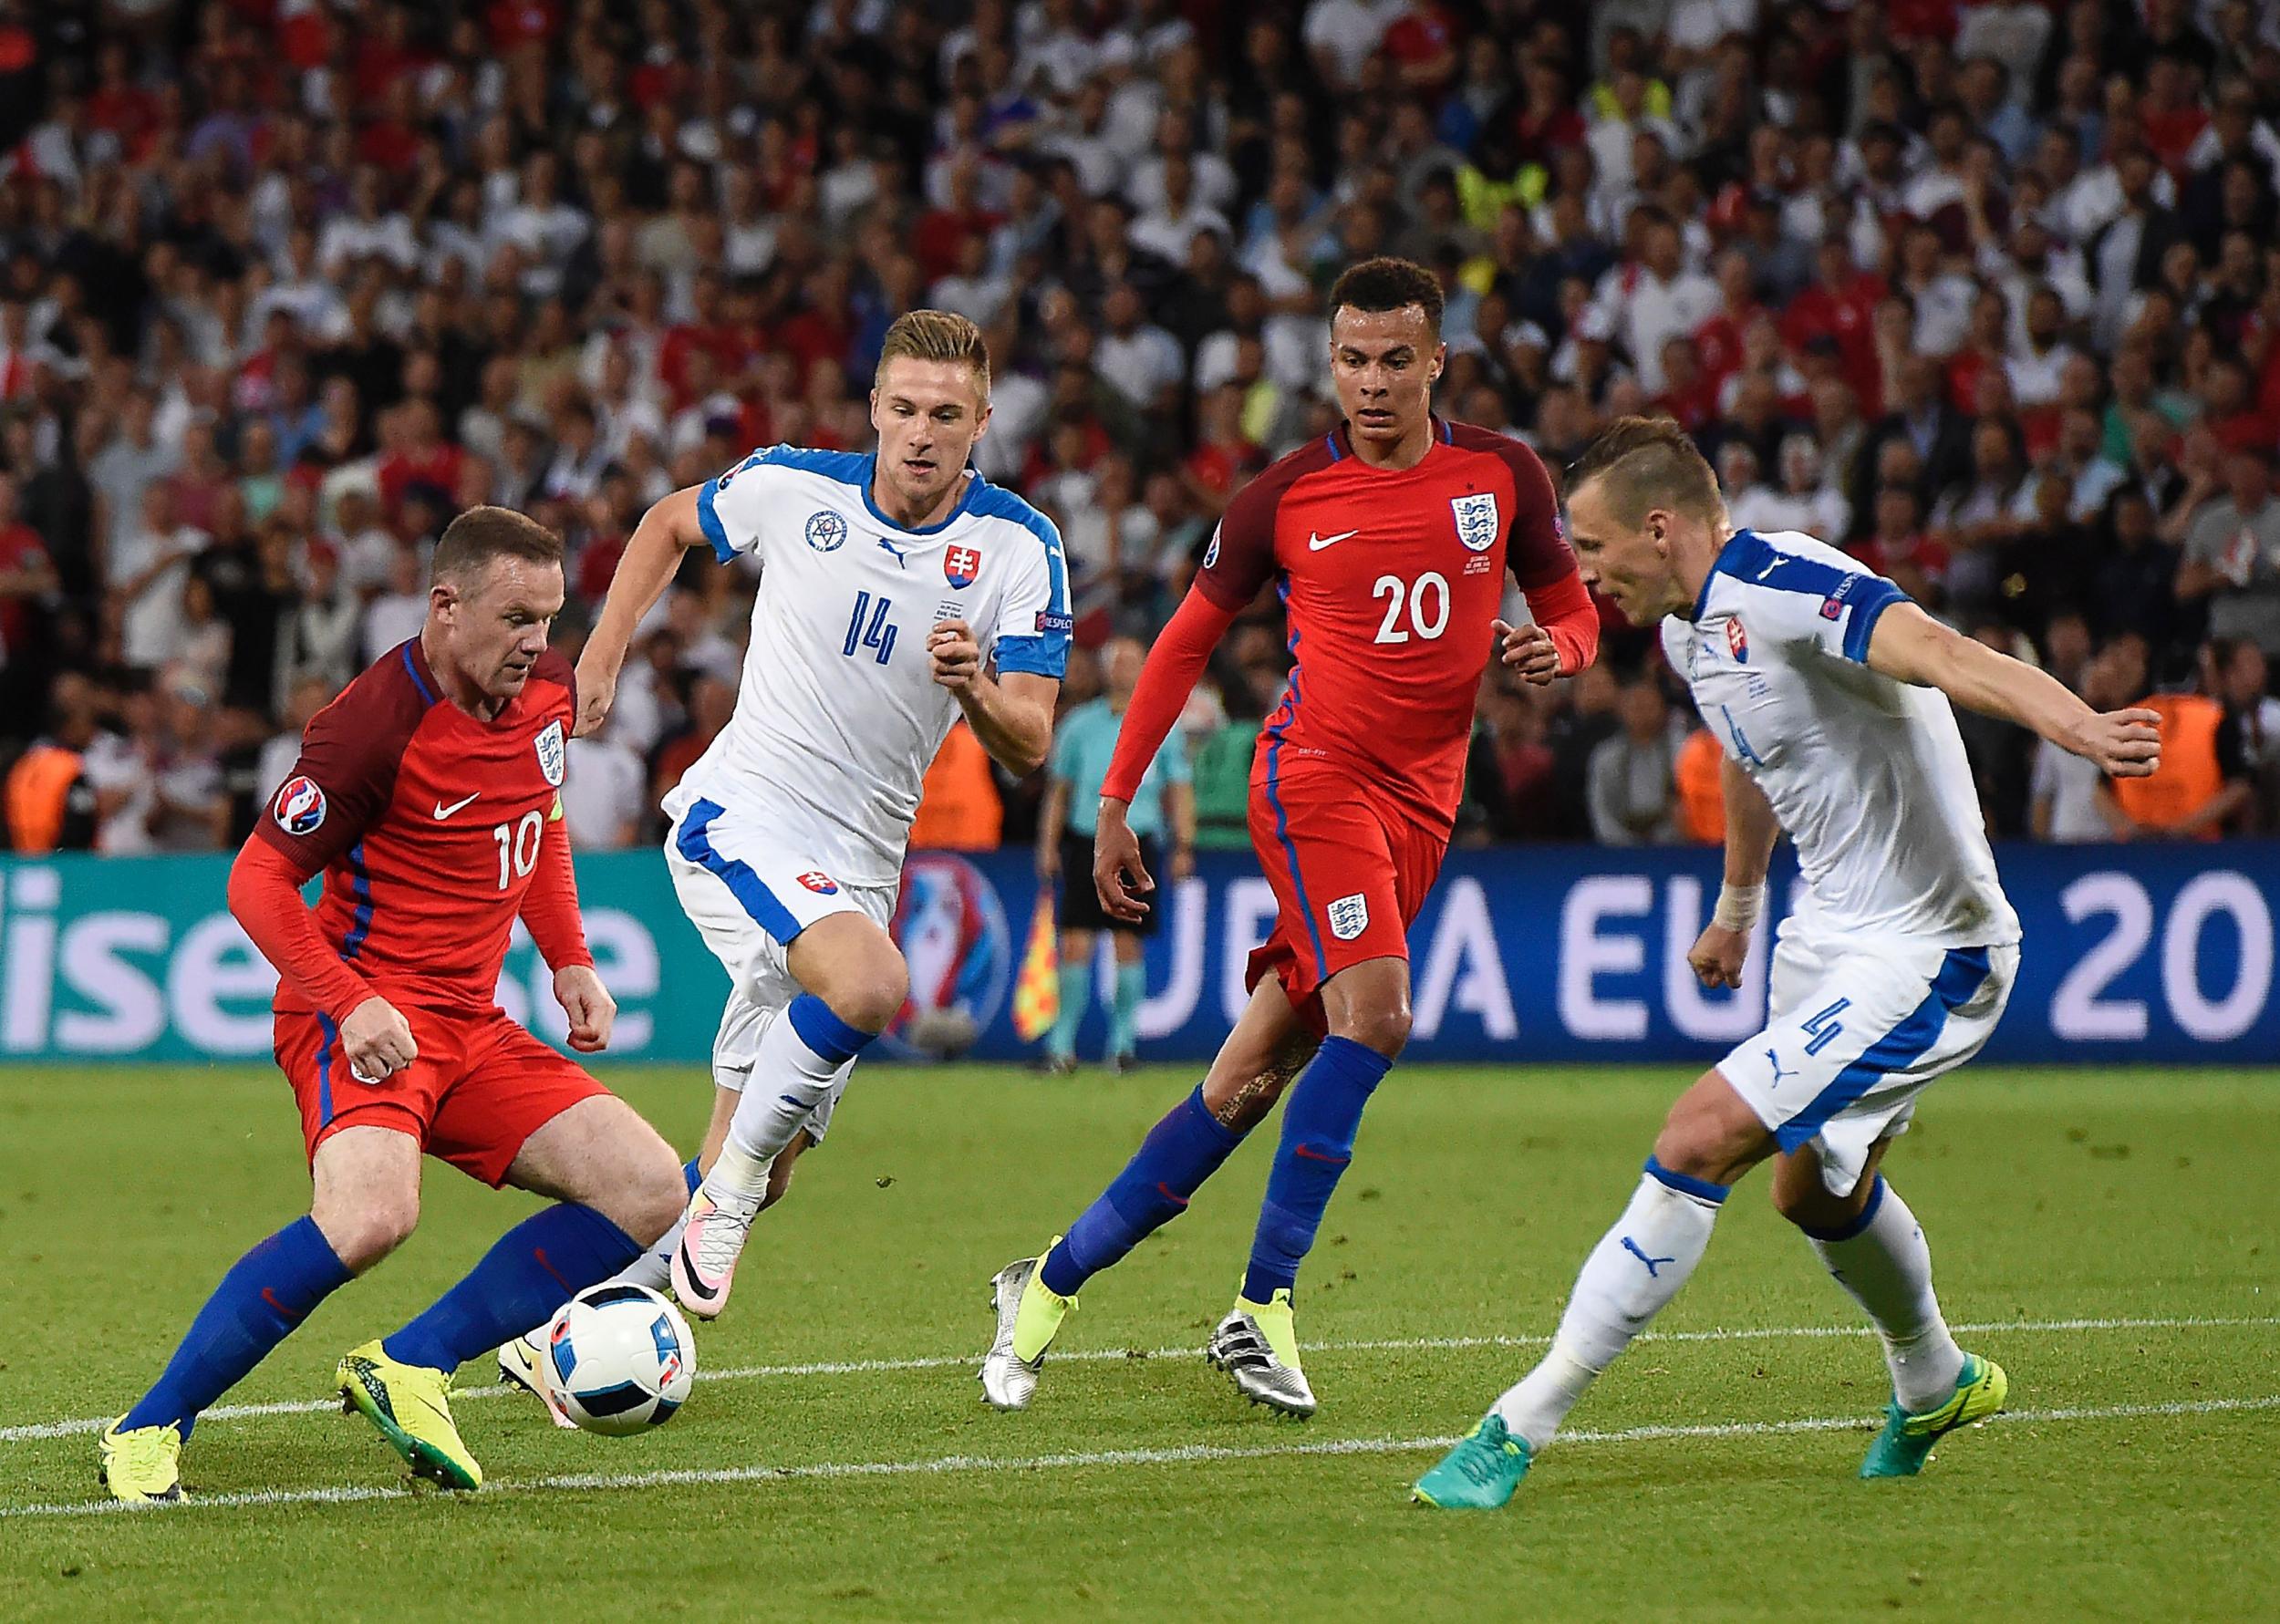 &#13;
Rooney struggled again for England at Euro 2016 &#13;